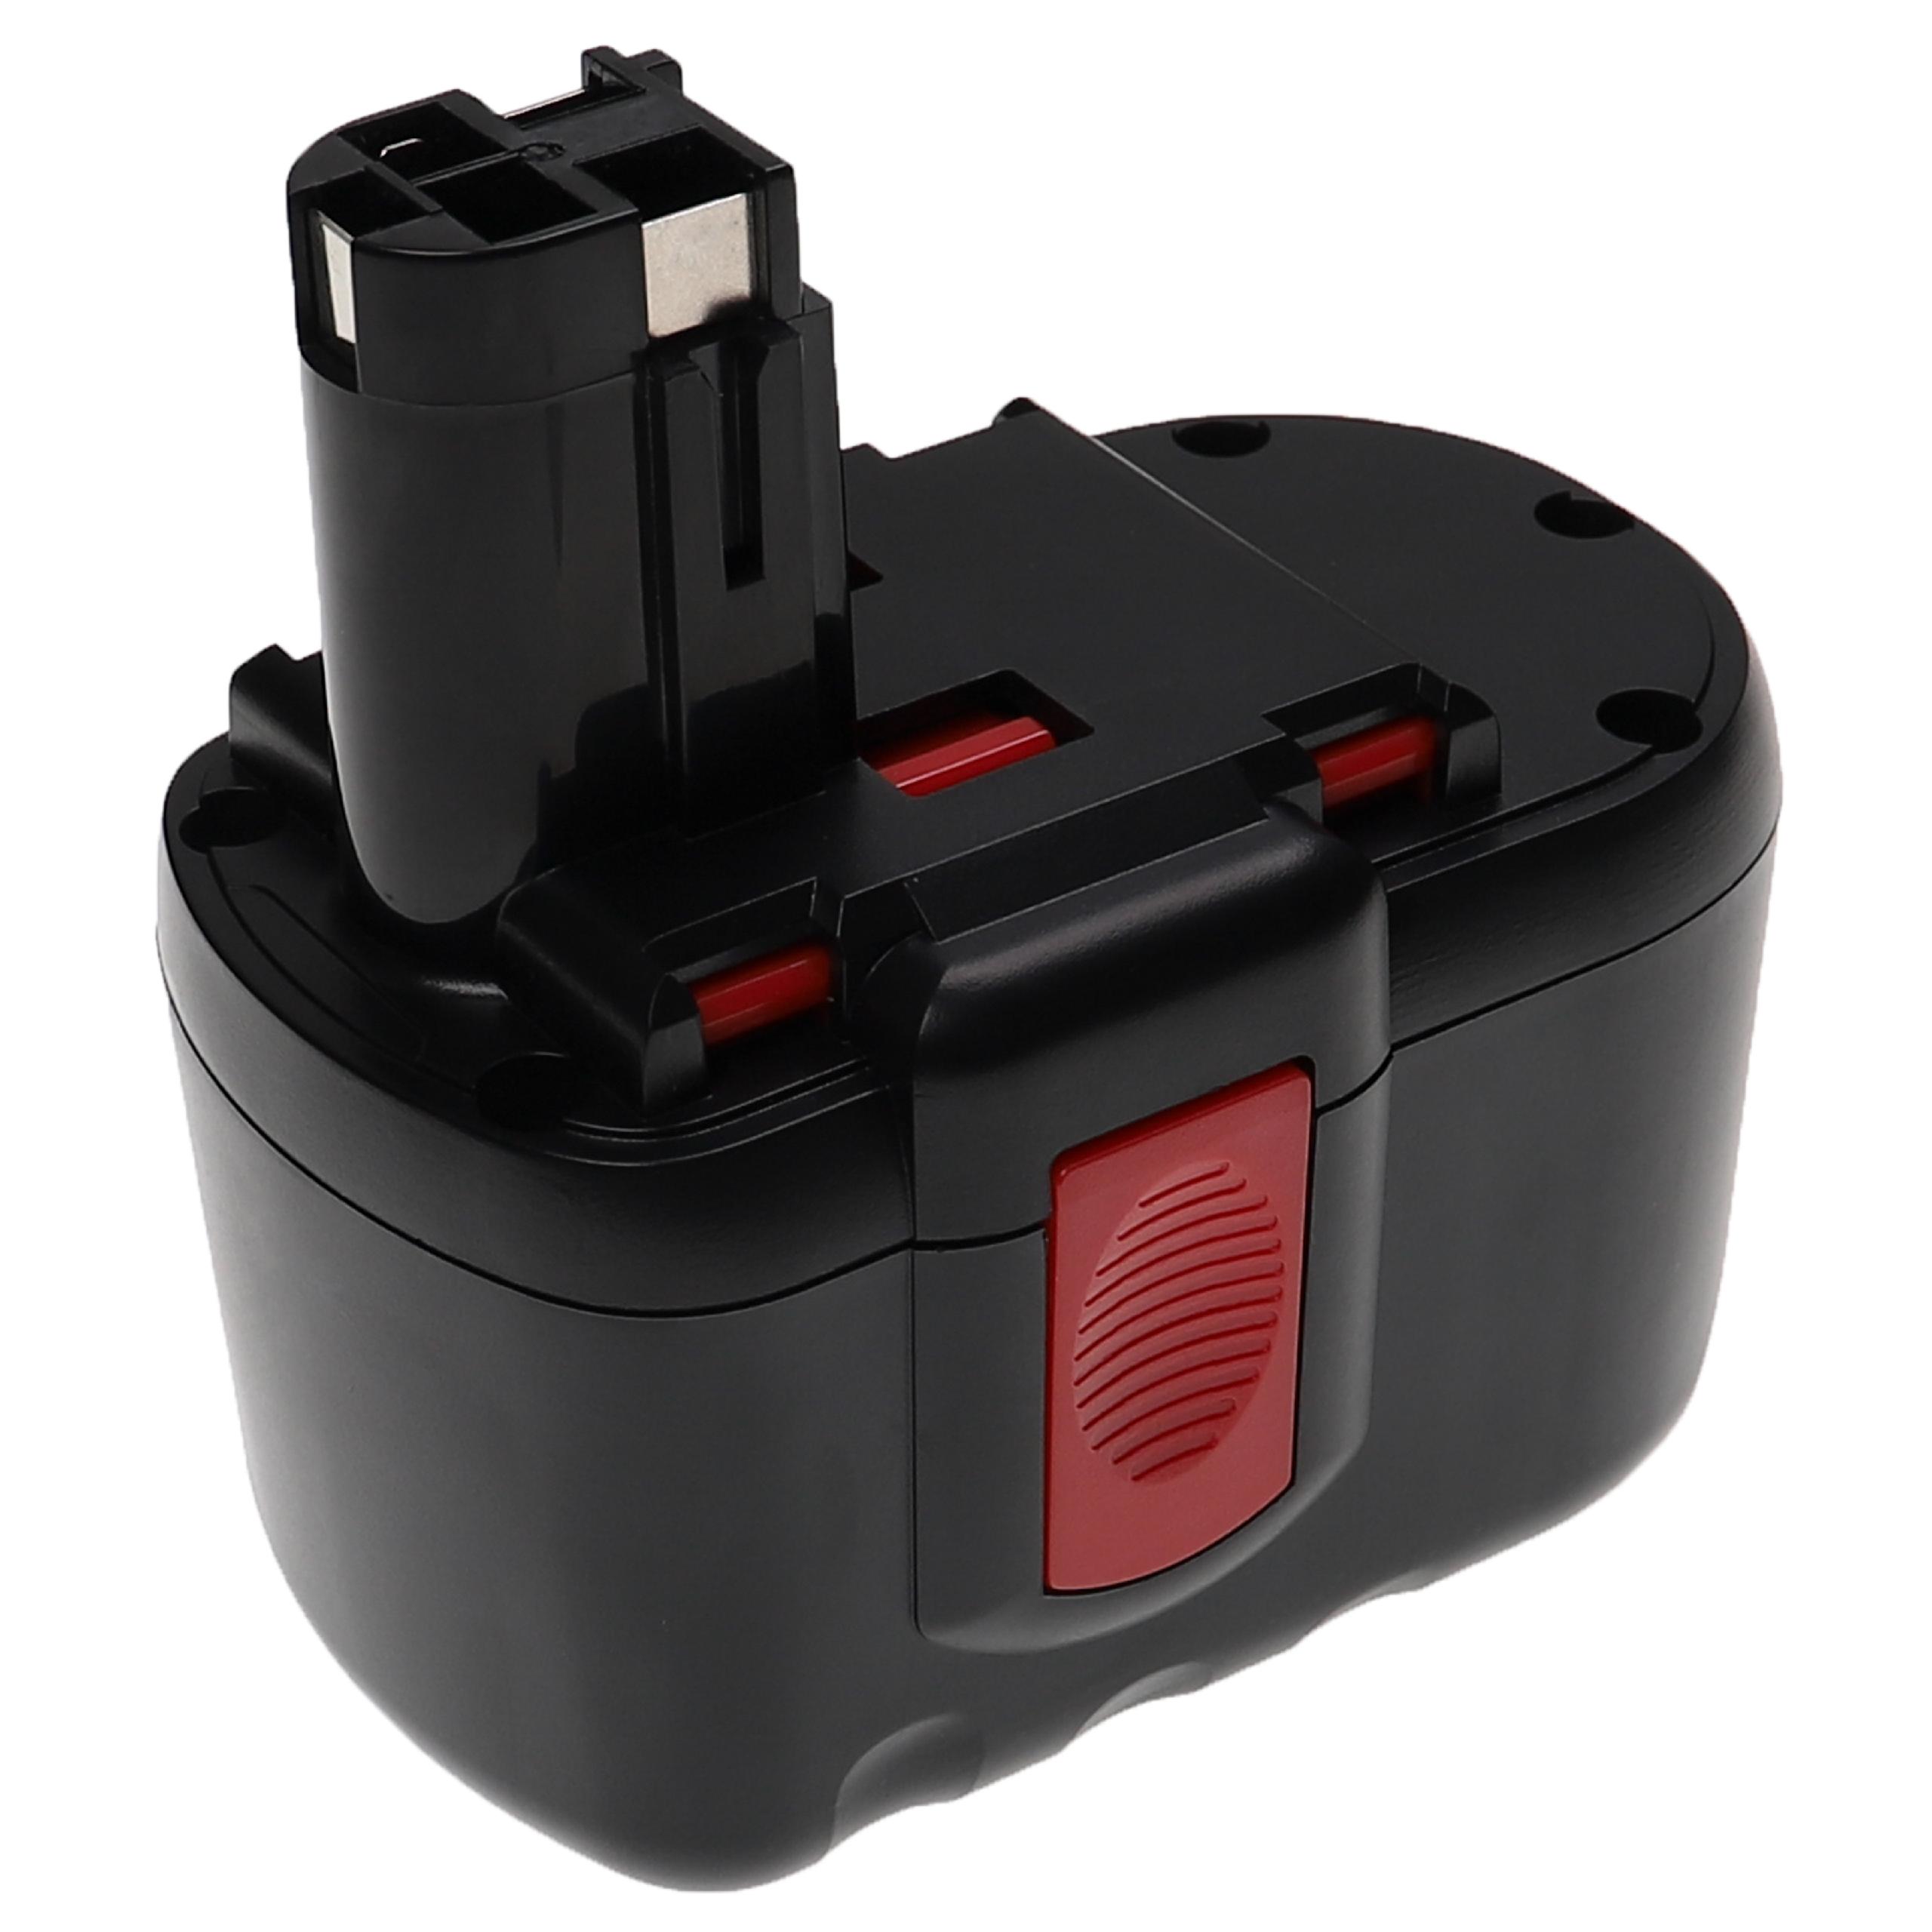 Electric Power Tool Battery Replaces Bosch 2607335280, 2607335279, 2607335268 - 3300 mAh, 24 V, NiMH